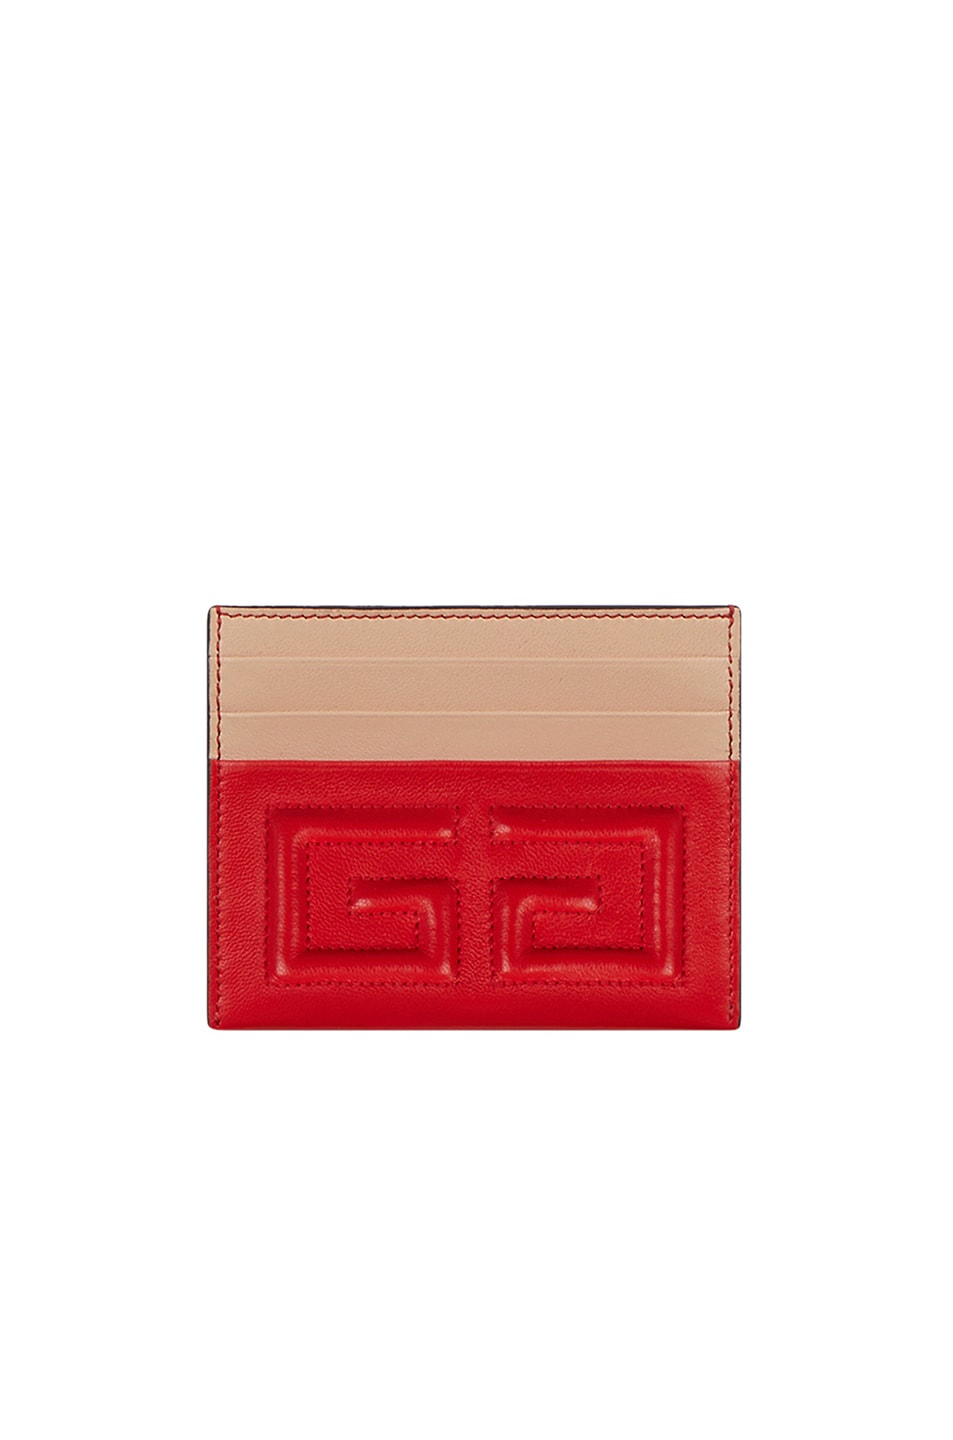 Image 1 of Givenchy Emblem Card Case in Poppy Red